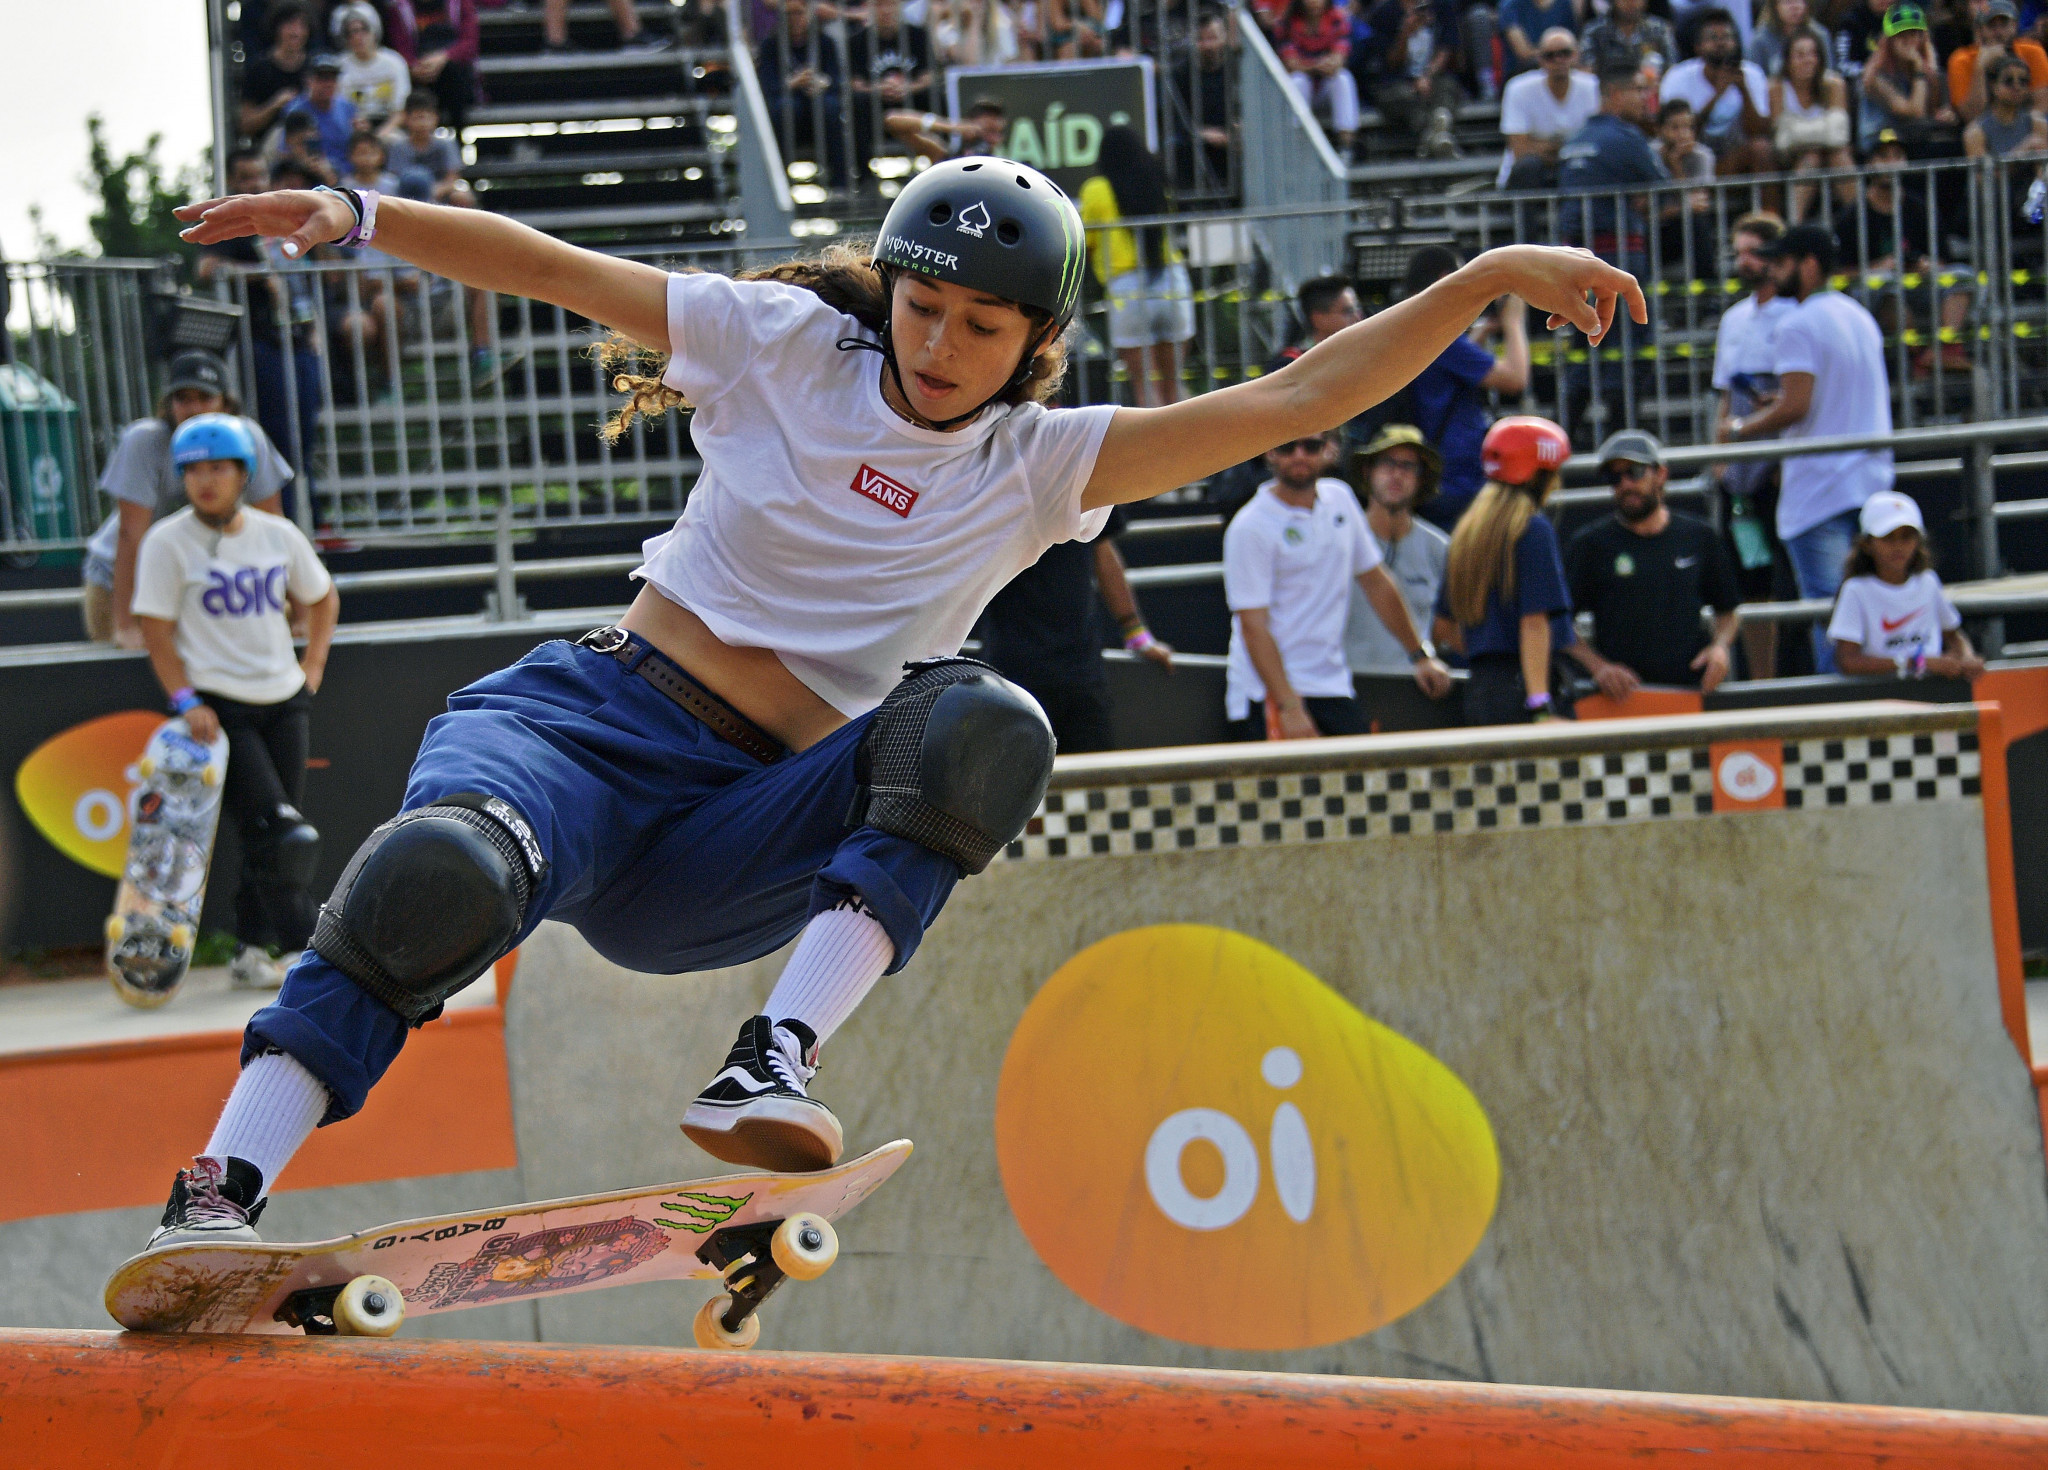 Skateboarding is due to make its Olympic debut at Tokyo 2020 next year ©Getty Images